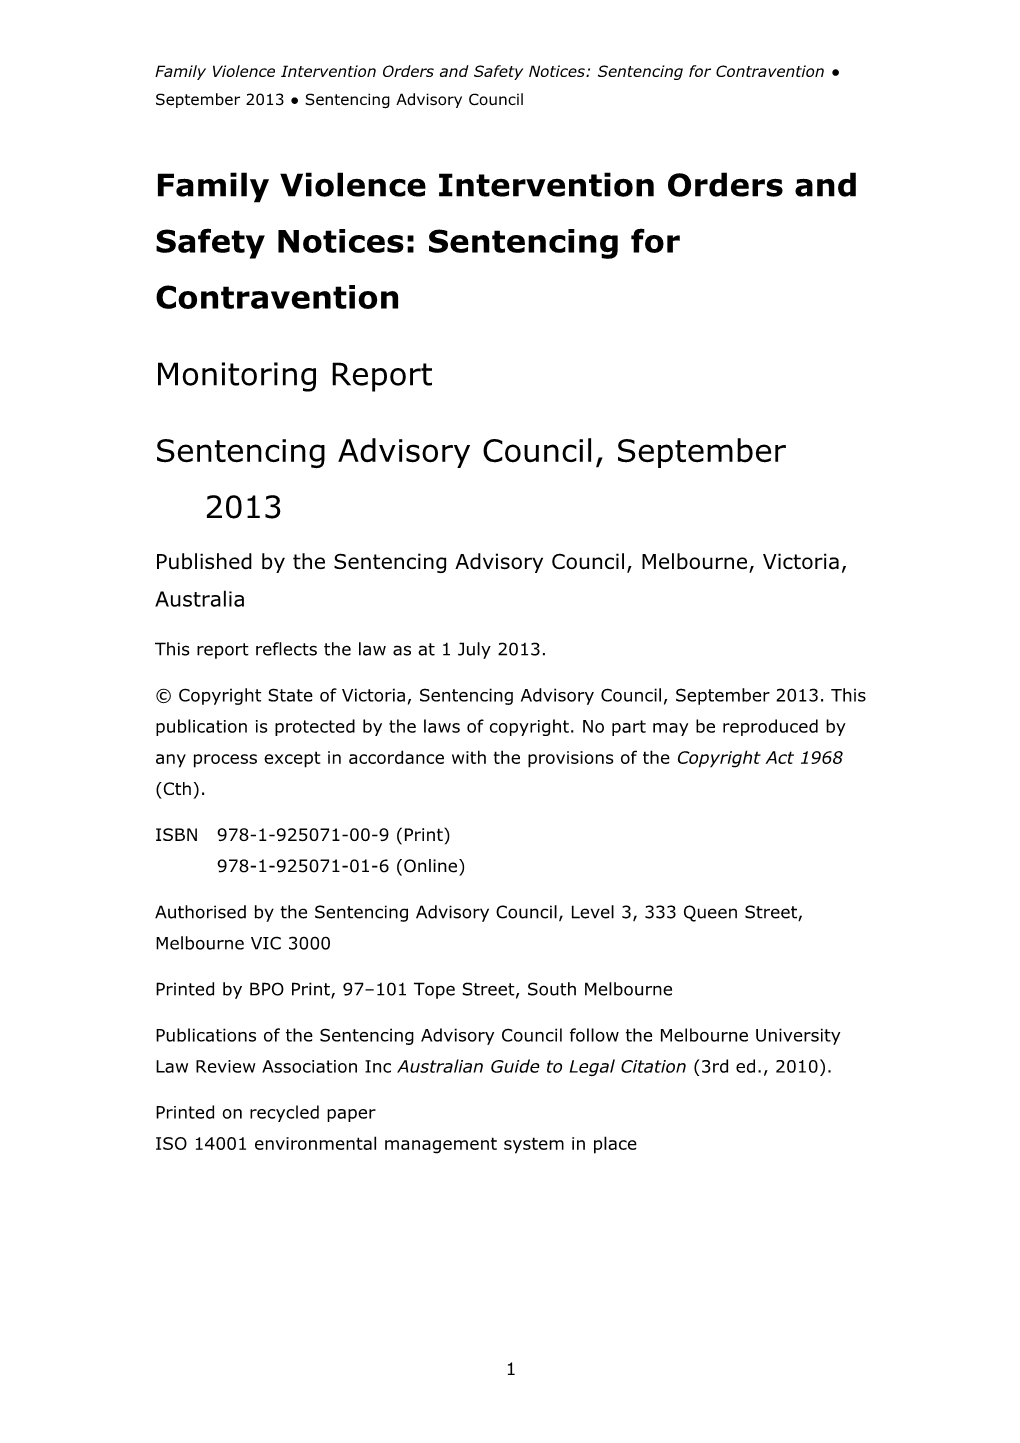 Family Violence Intervention Orders and Safety Notices: Sentencing for Contravention